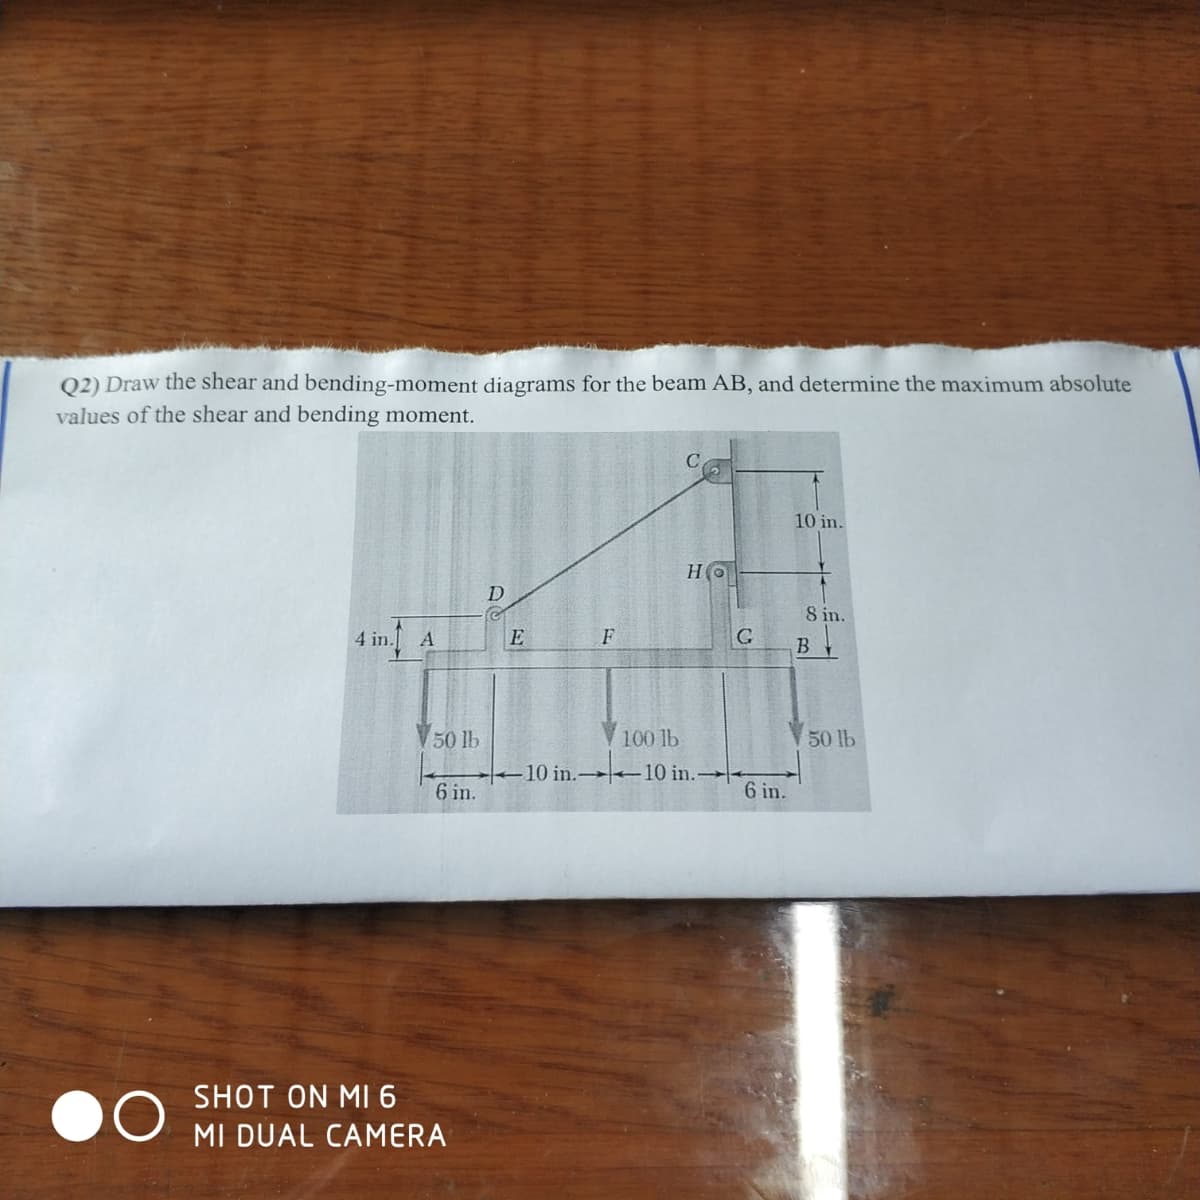 Q2) Draw the shear and bending-moment diagrams for the beam AB, and determine the maximum absolute
values of the shear and bending moment.
10 in.
HO
D
S in.
4 in.
E
F
G
B
50 lb
100 lb
50 lb
10 in. –10 in.-
6 in.
6 in.
SHOT ON MI 6
MI DUAL CAMERA
